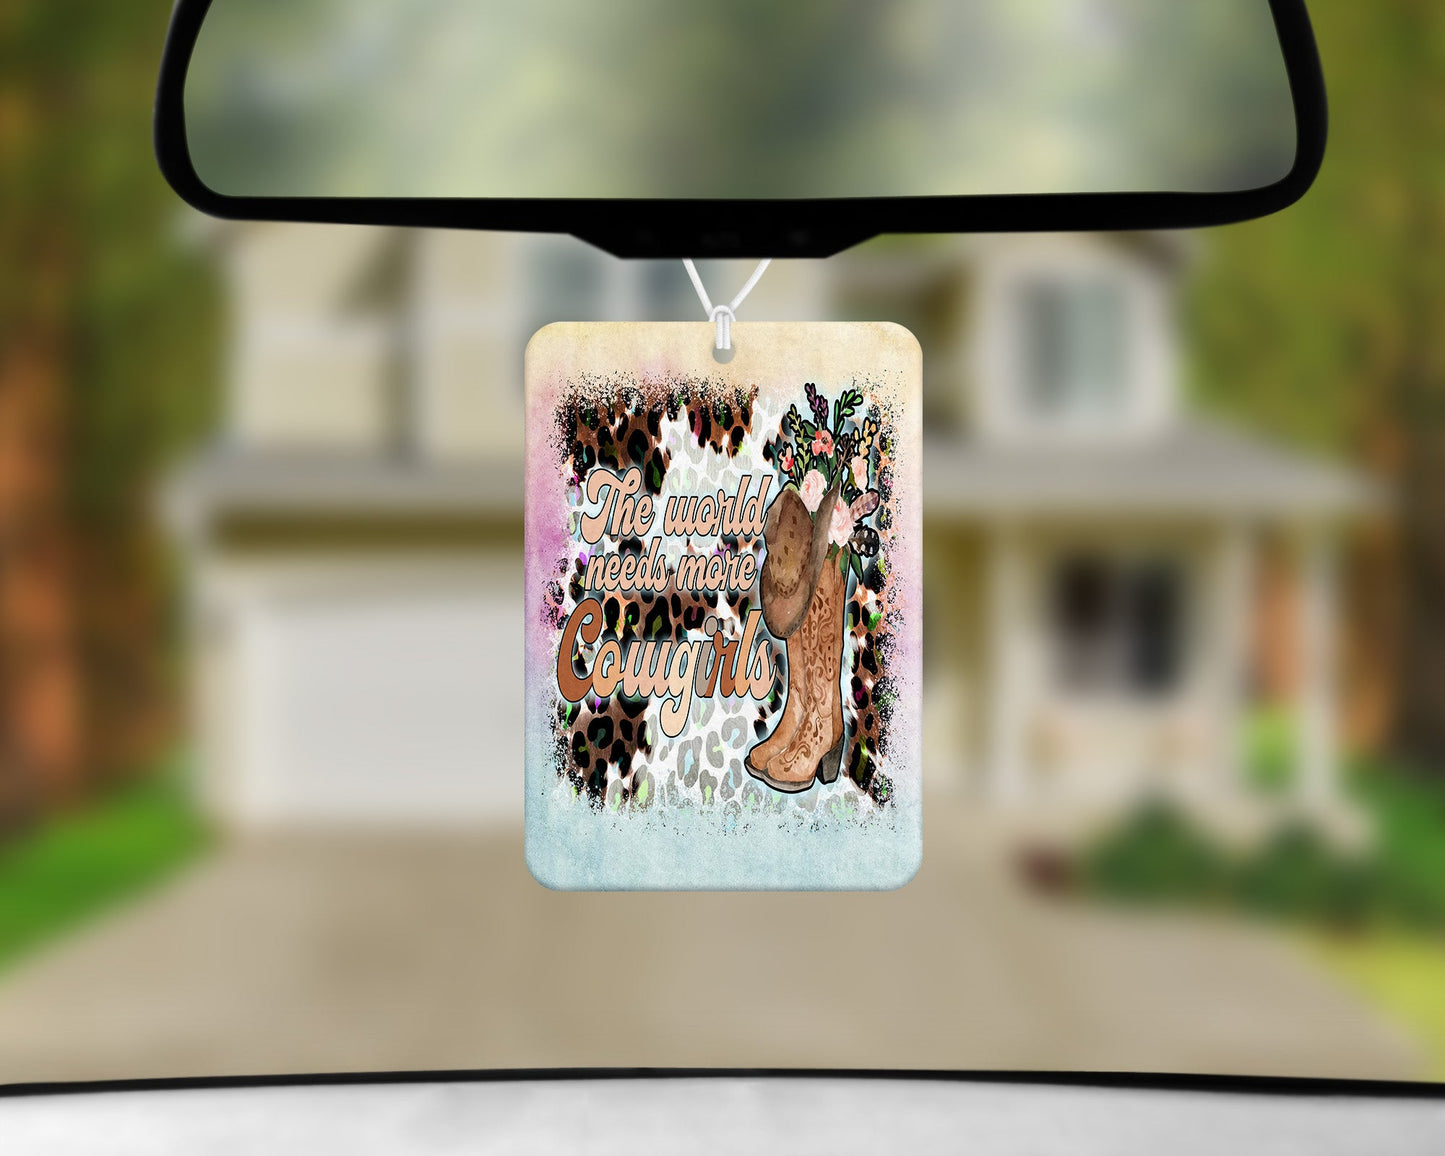 The World Needs More Cowgirls|Freshie|Includes Scent Bottle - Vehicle Air Freshener